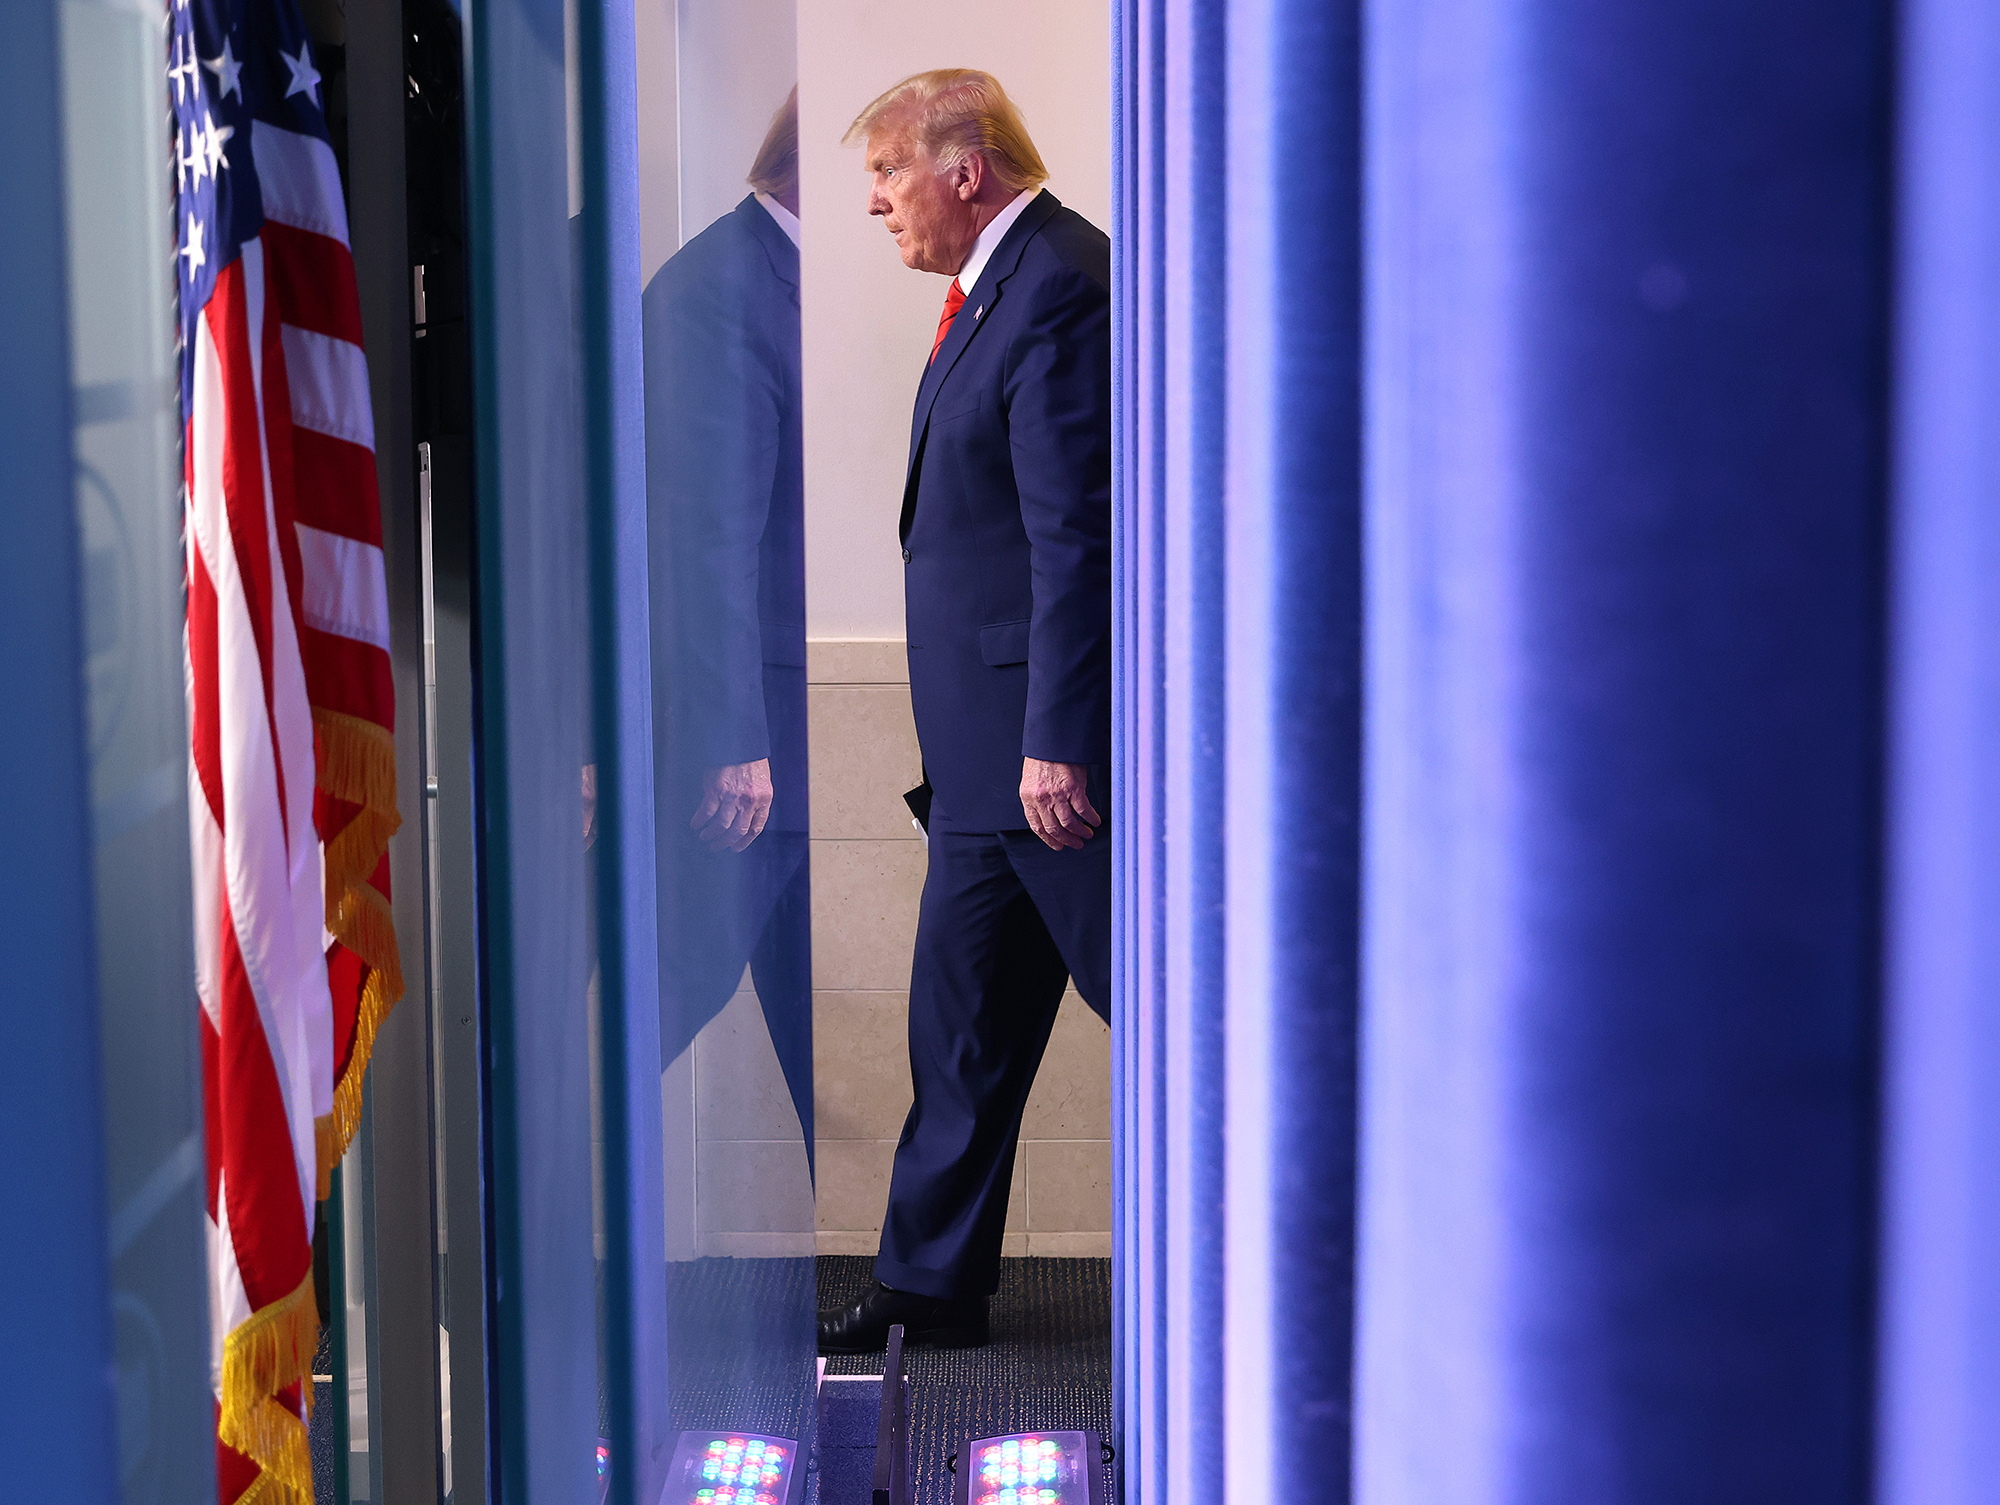 President Donald Trump walks into the briefing room to speak at the White House on August 31 in Washington.